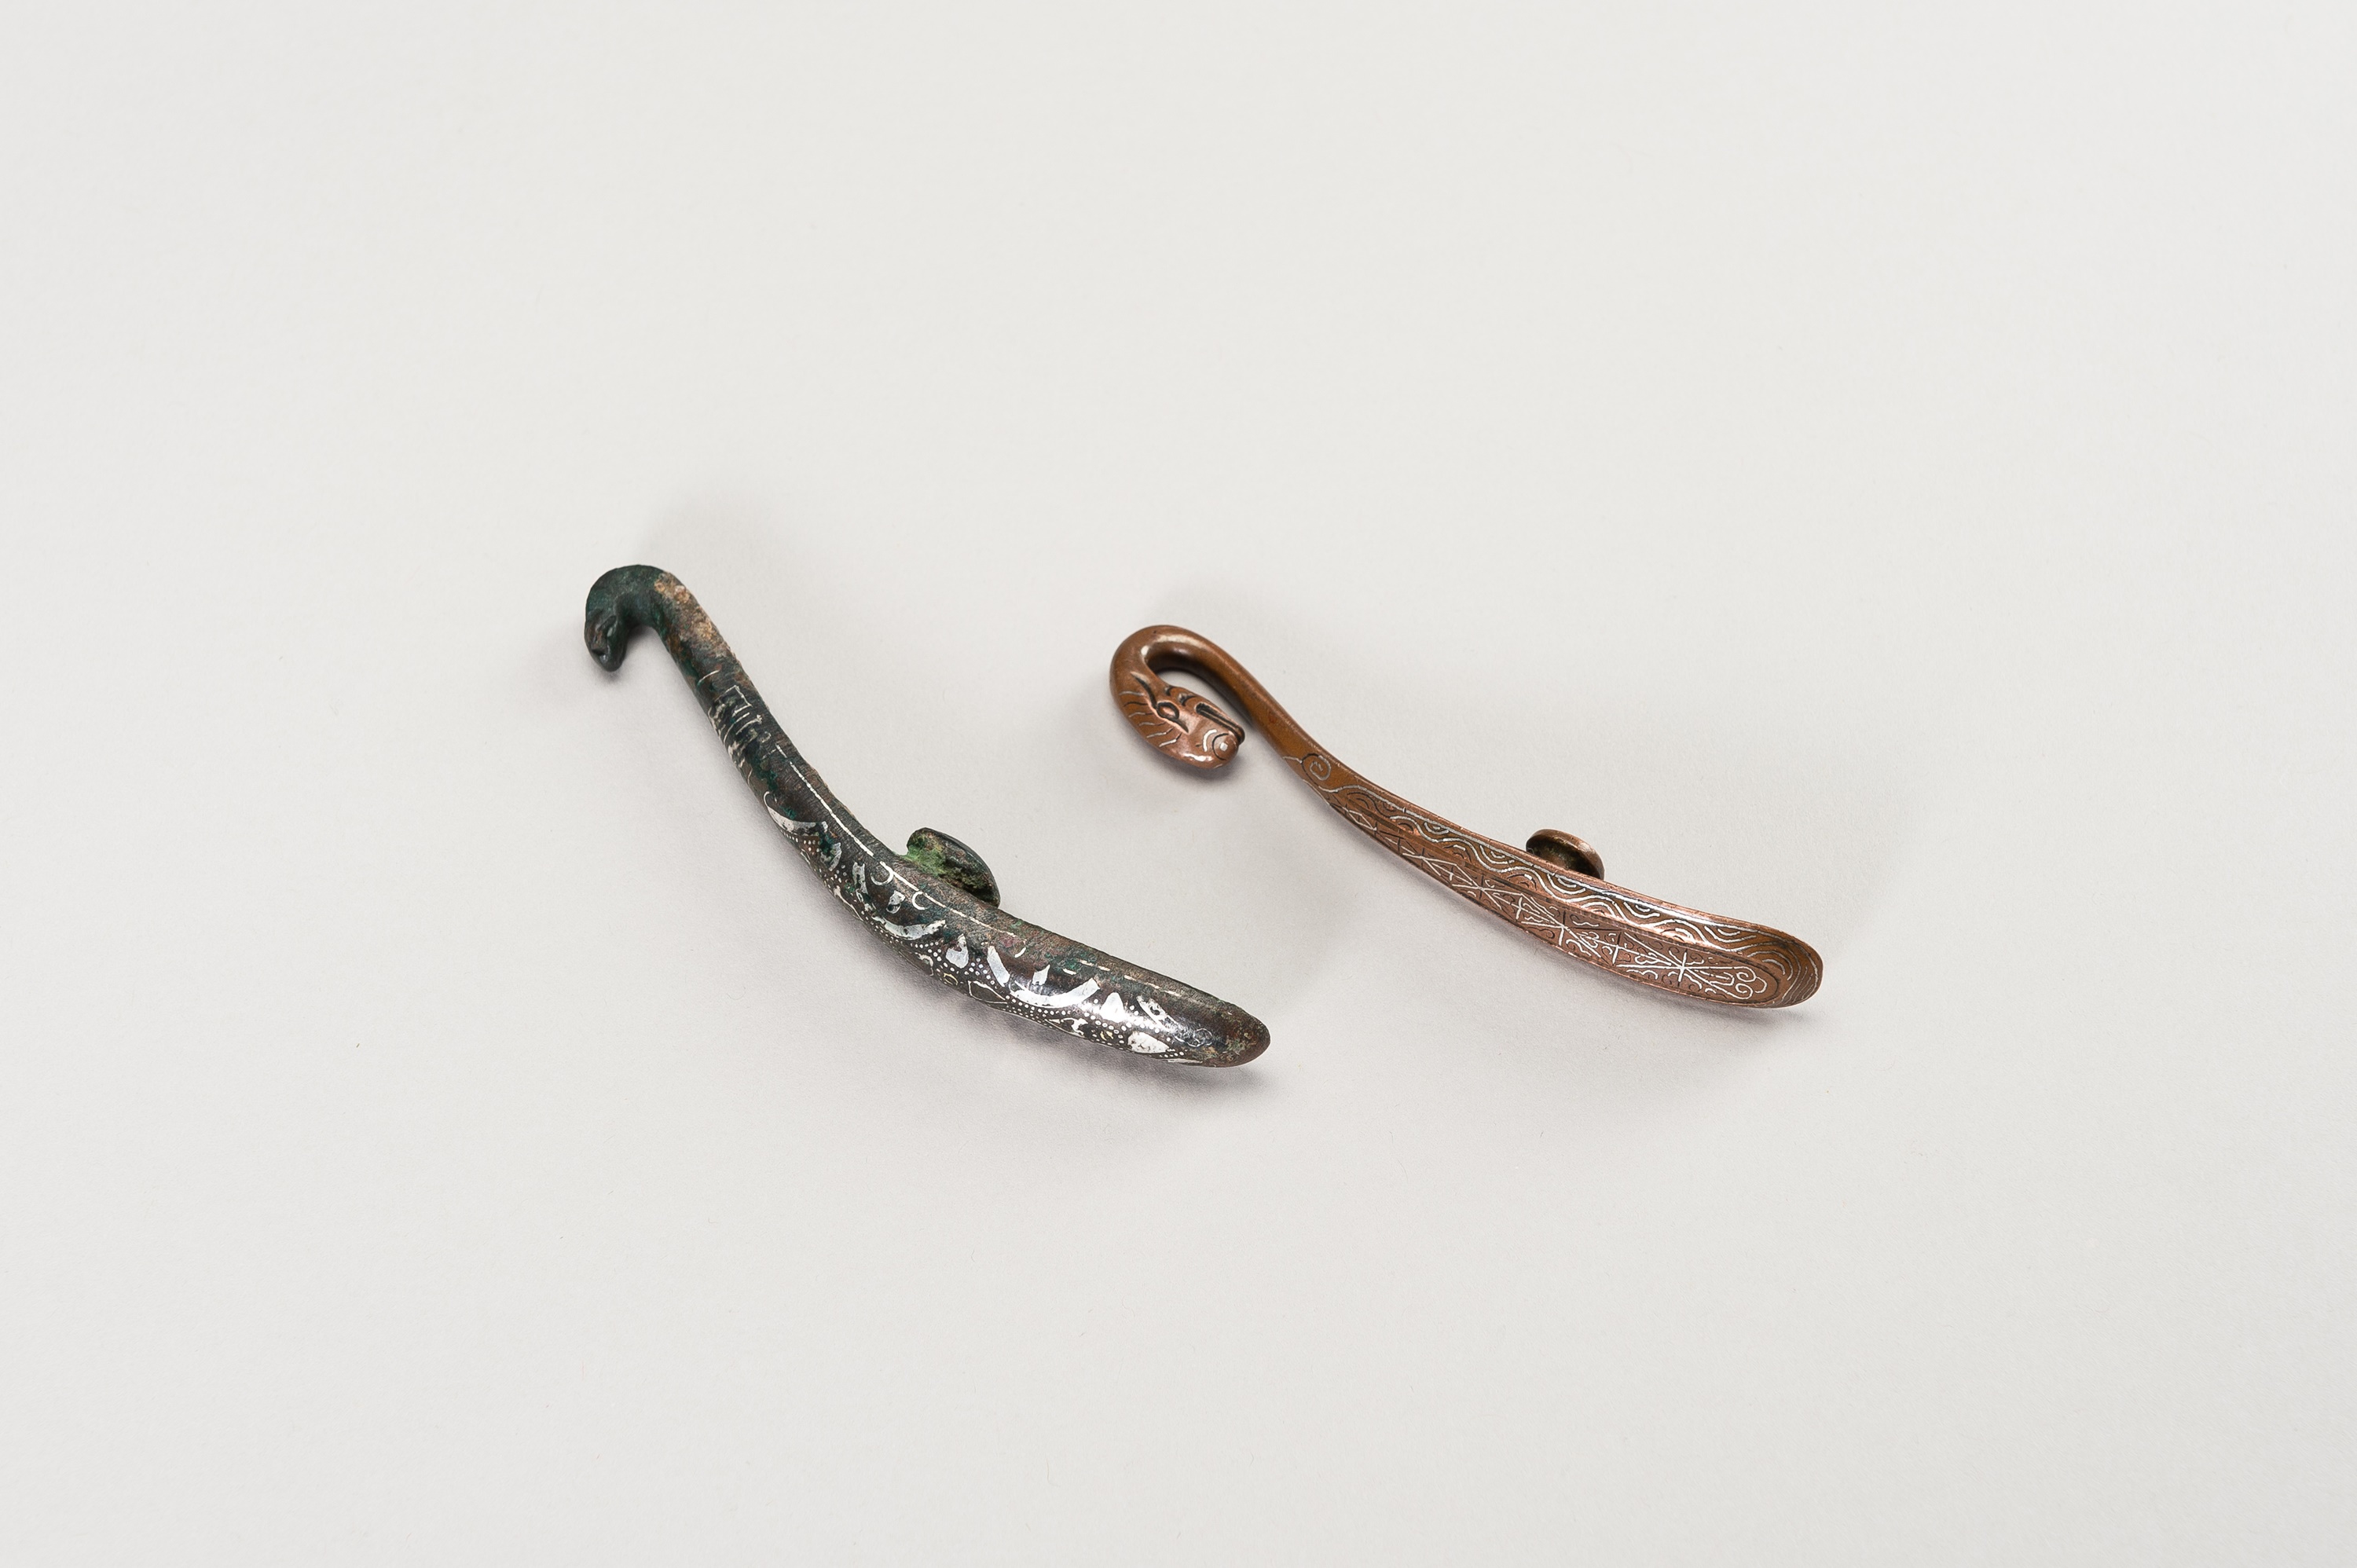 A FINE PAIR OF SILVER-INLAID BELT HOOKS - Image 7 of 9